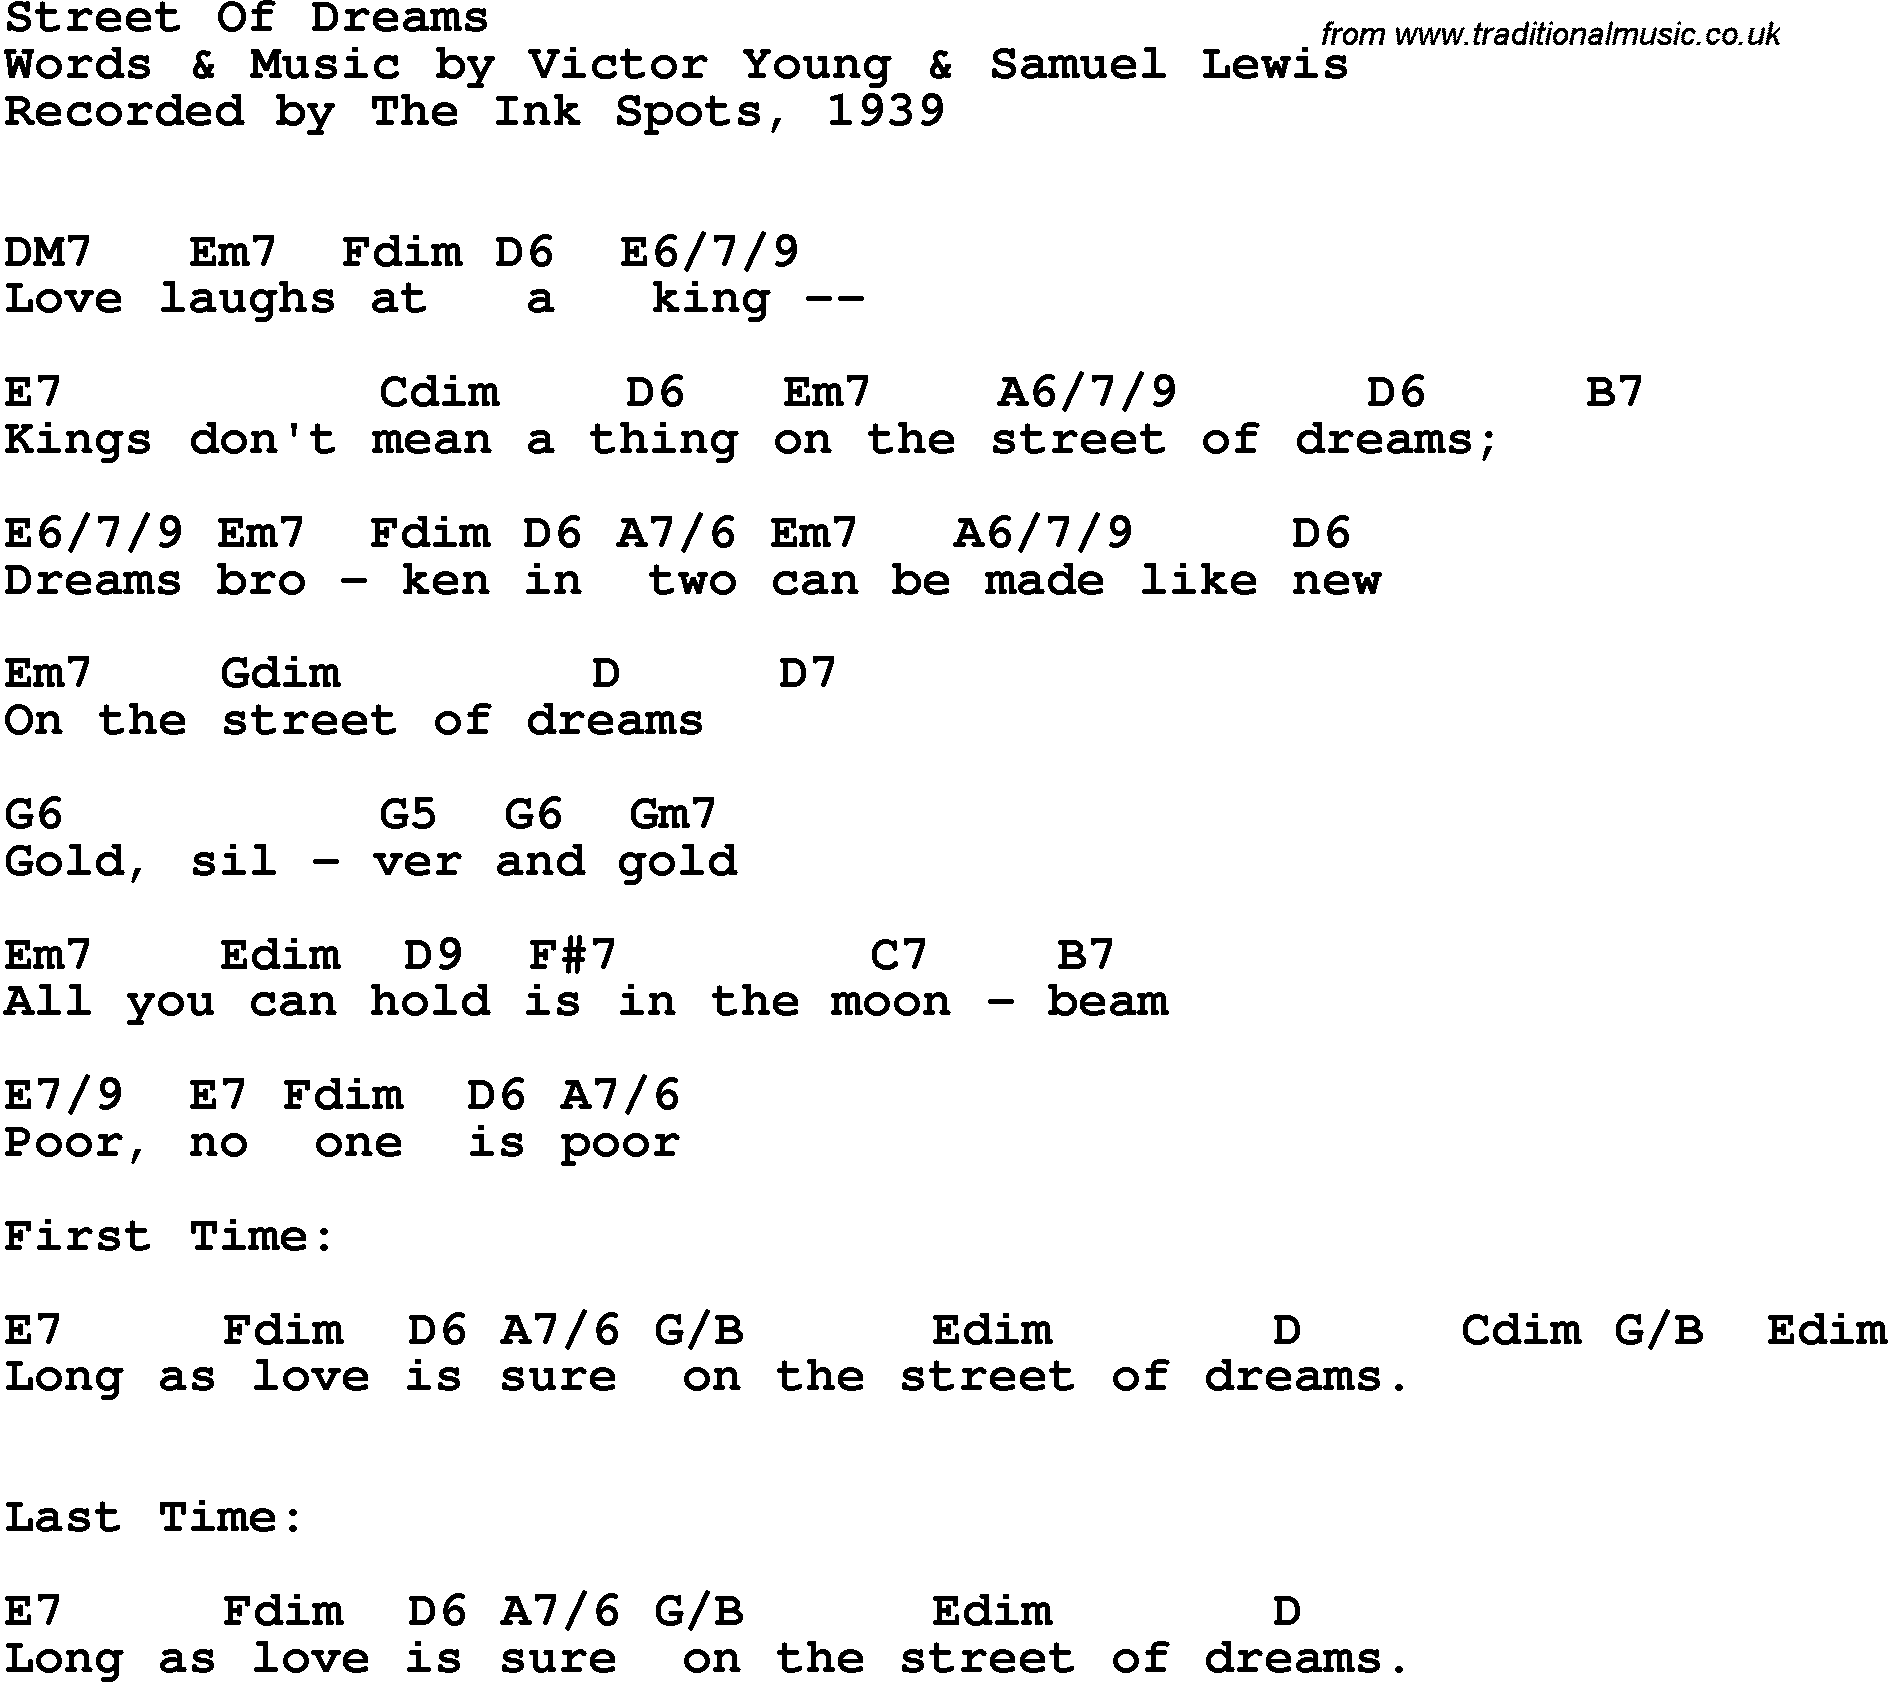 Song Lyrics with guitar chords for Street Of Dreams - The Ink Spots, 1939